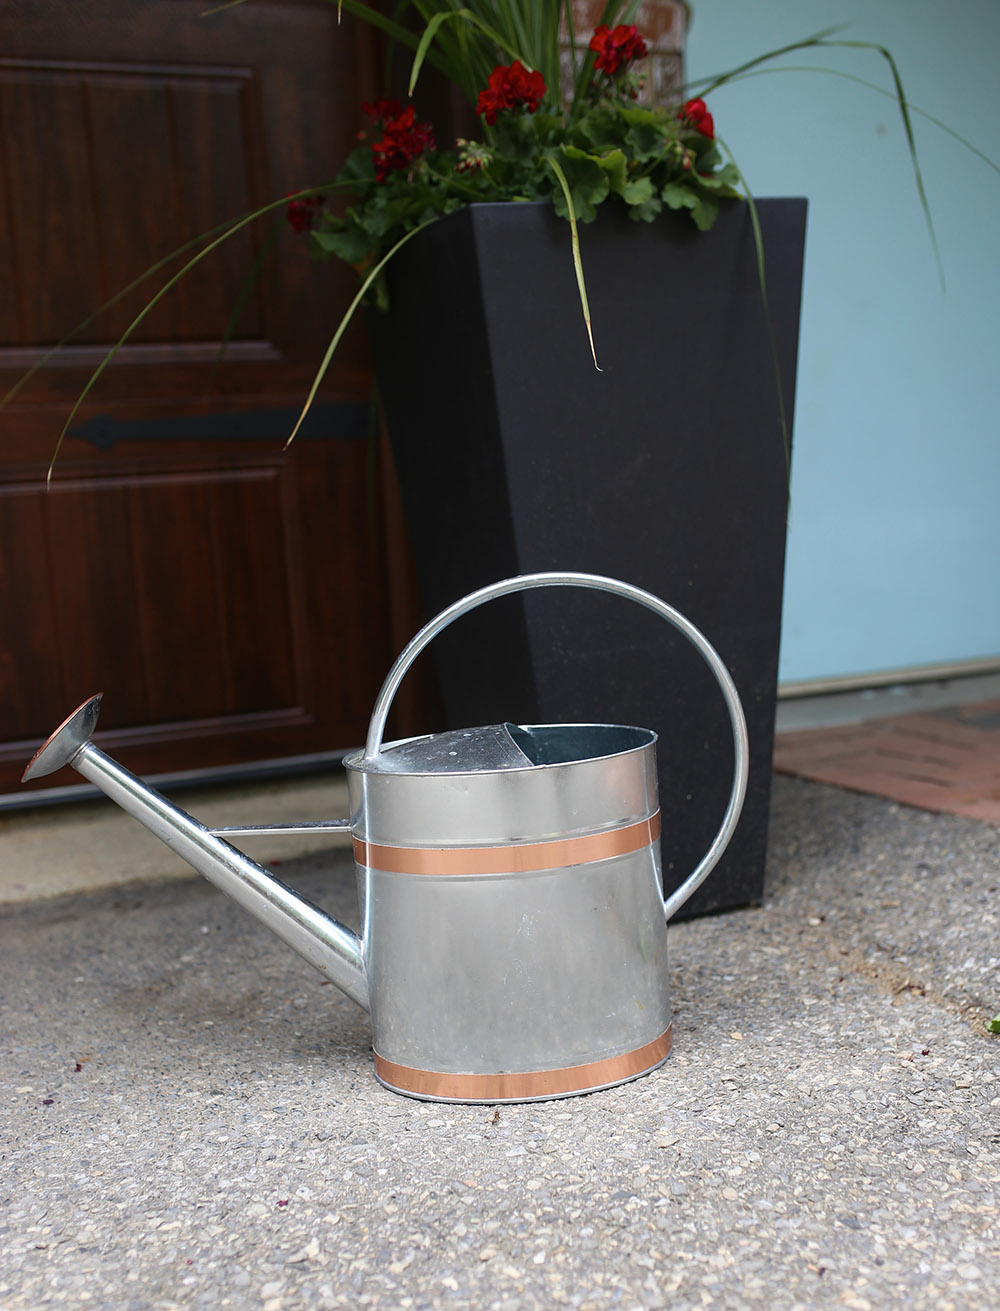 A metal watering can with copper accents sits on the ground in front of a black planter filled with flowers.